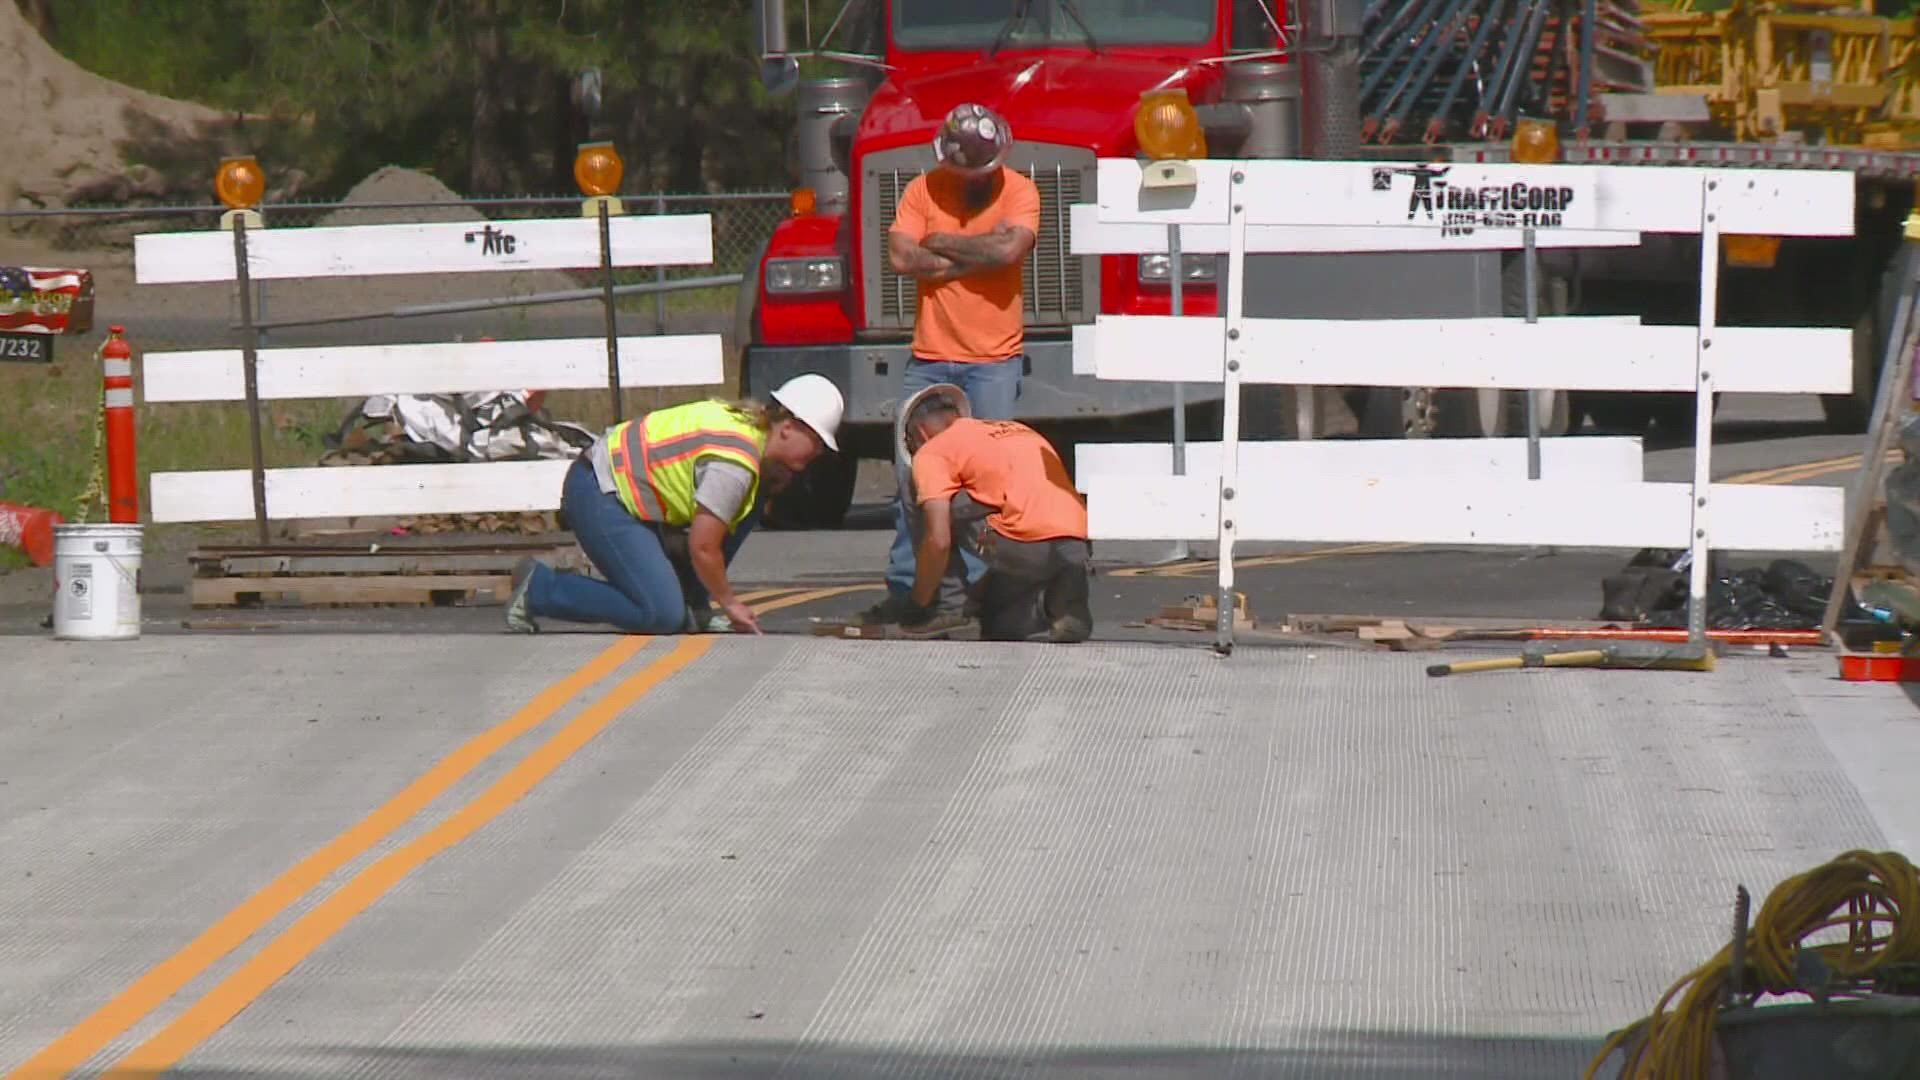 The City of Spokane said they are still working to wrap up construction work on the Hatch Road Bridge but still plan to reopen ahead of time.